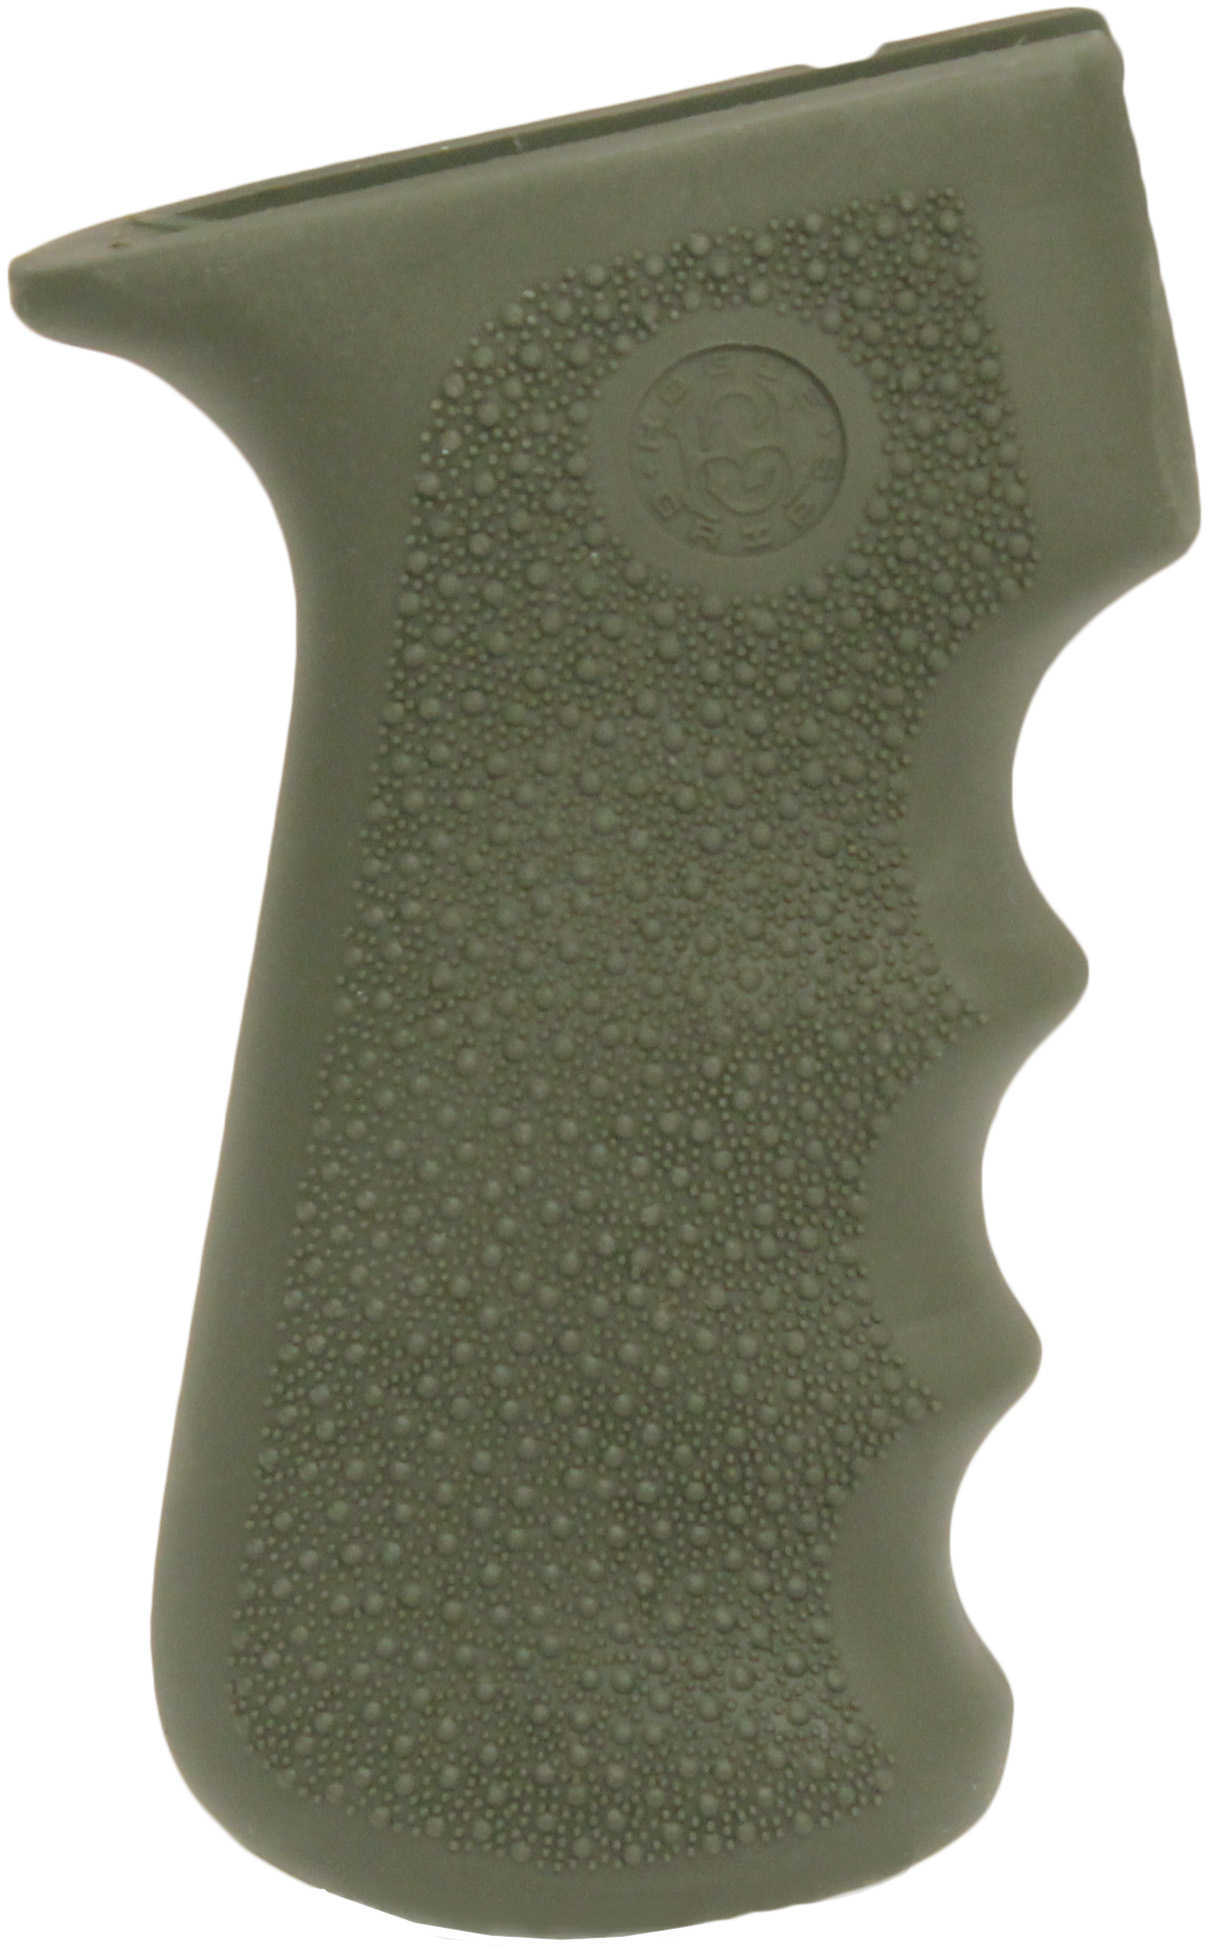 Hogue Rubber Grip With Finger Grooves AK-47/AK-74 - OD Green Durable Synthetic Cobblestone Texture Light